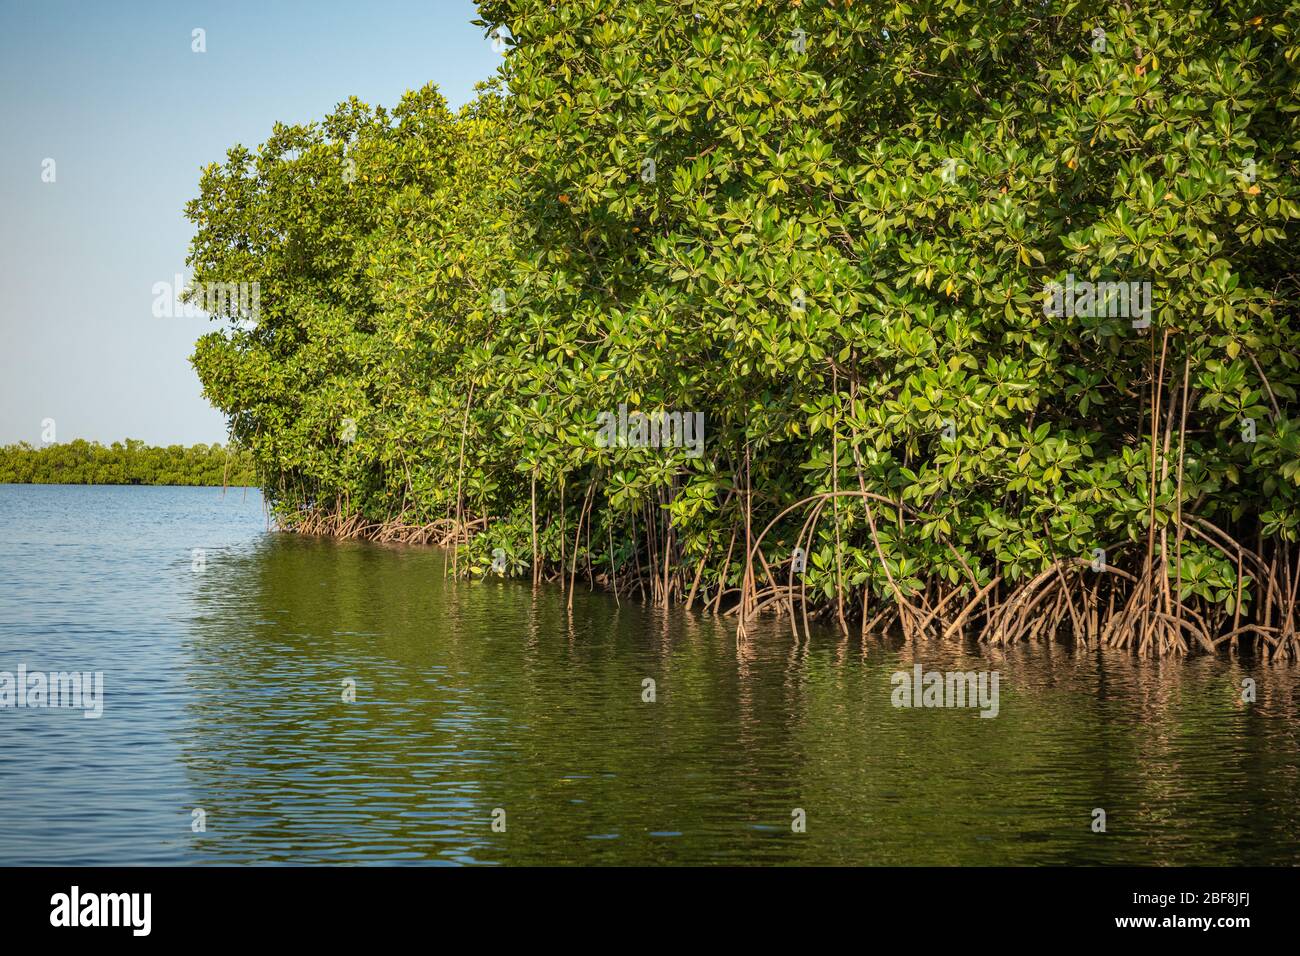 Gambia Mangroves. Kayaking in green mangrove forest in Gambia. Africa Natural Landscape Stock - Alamy